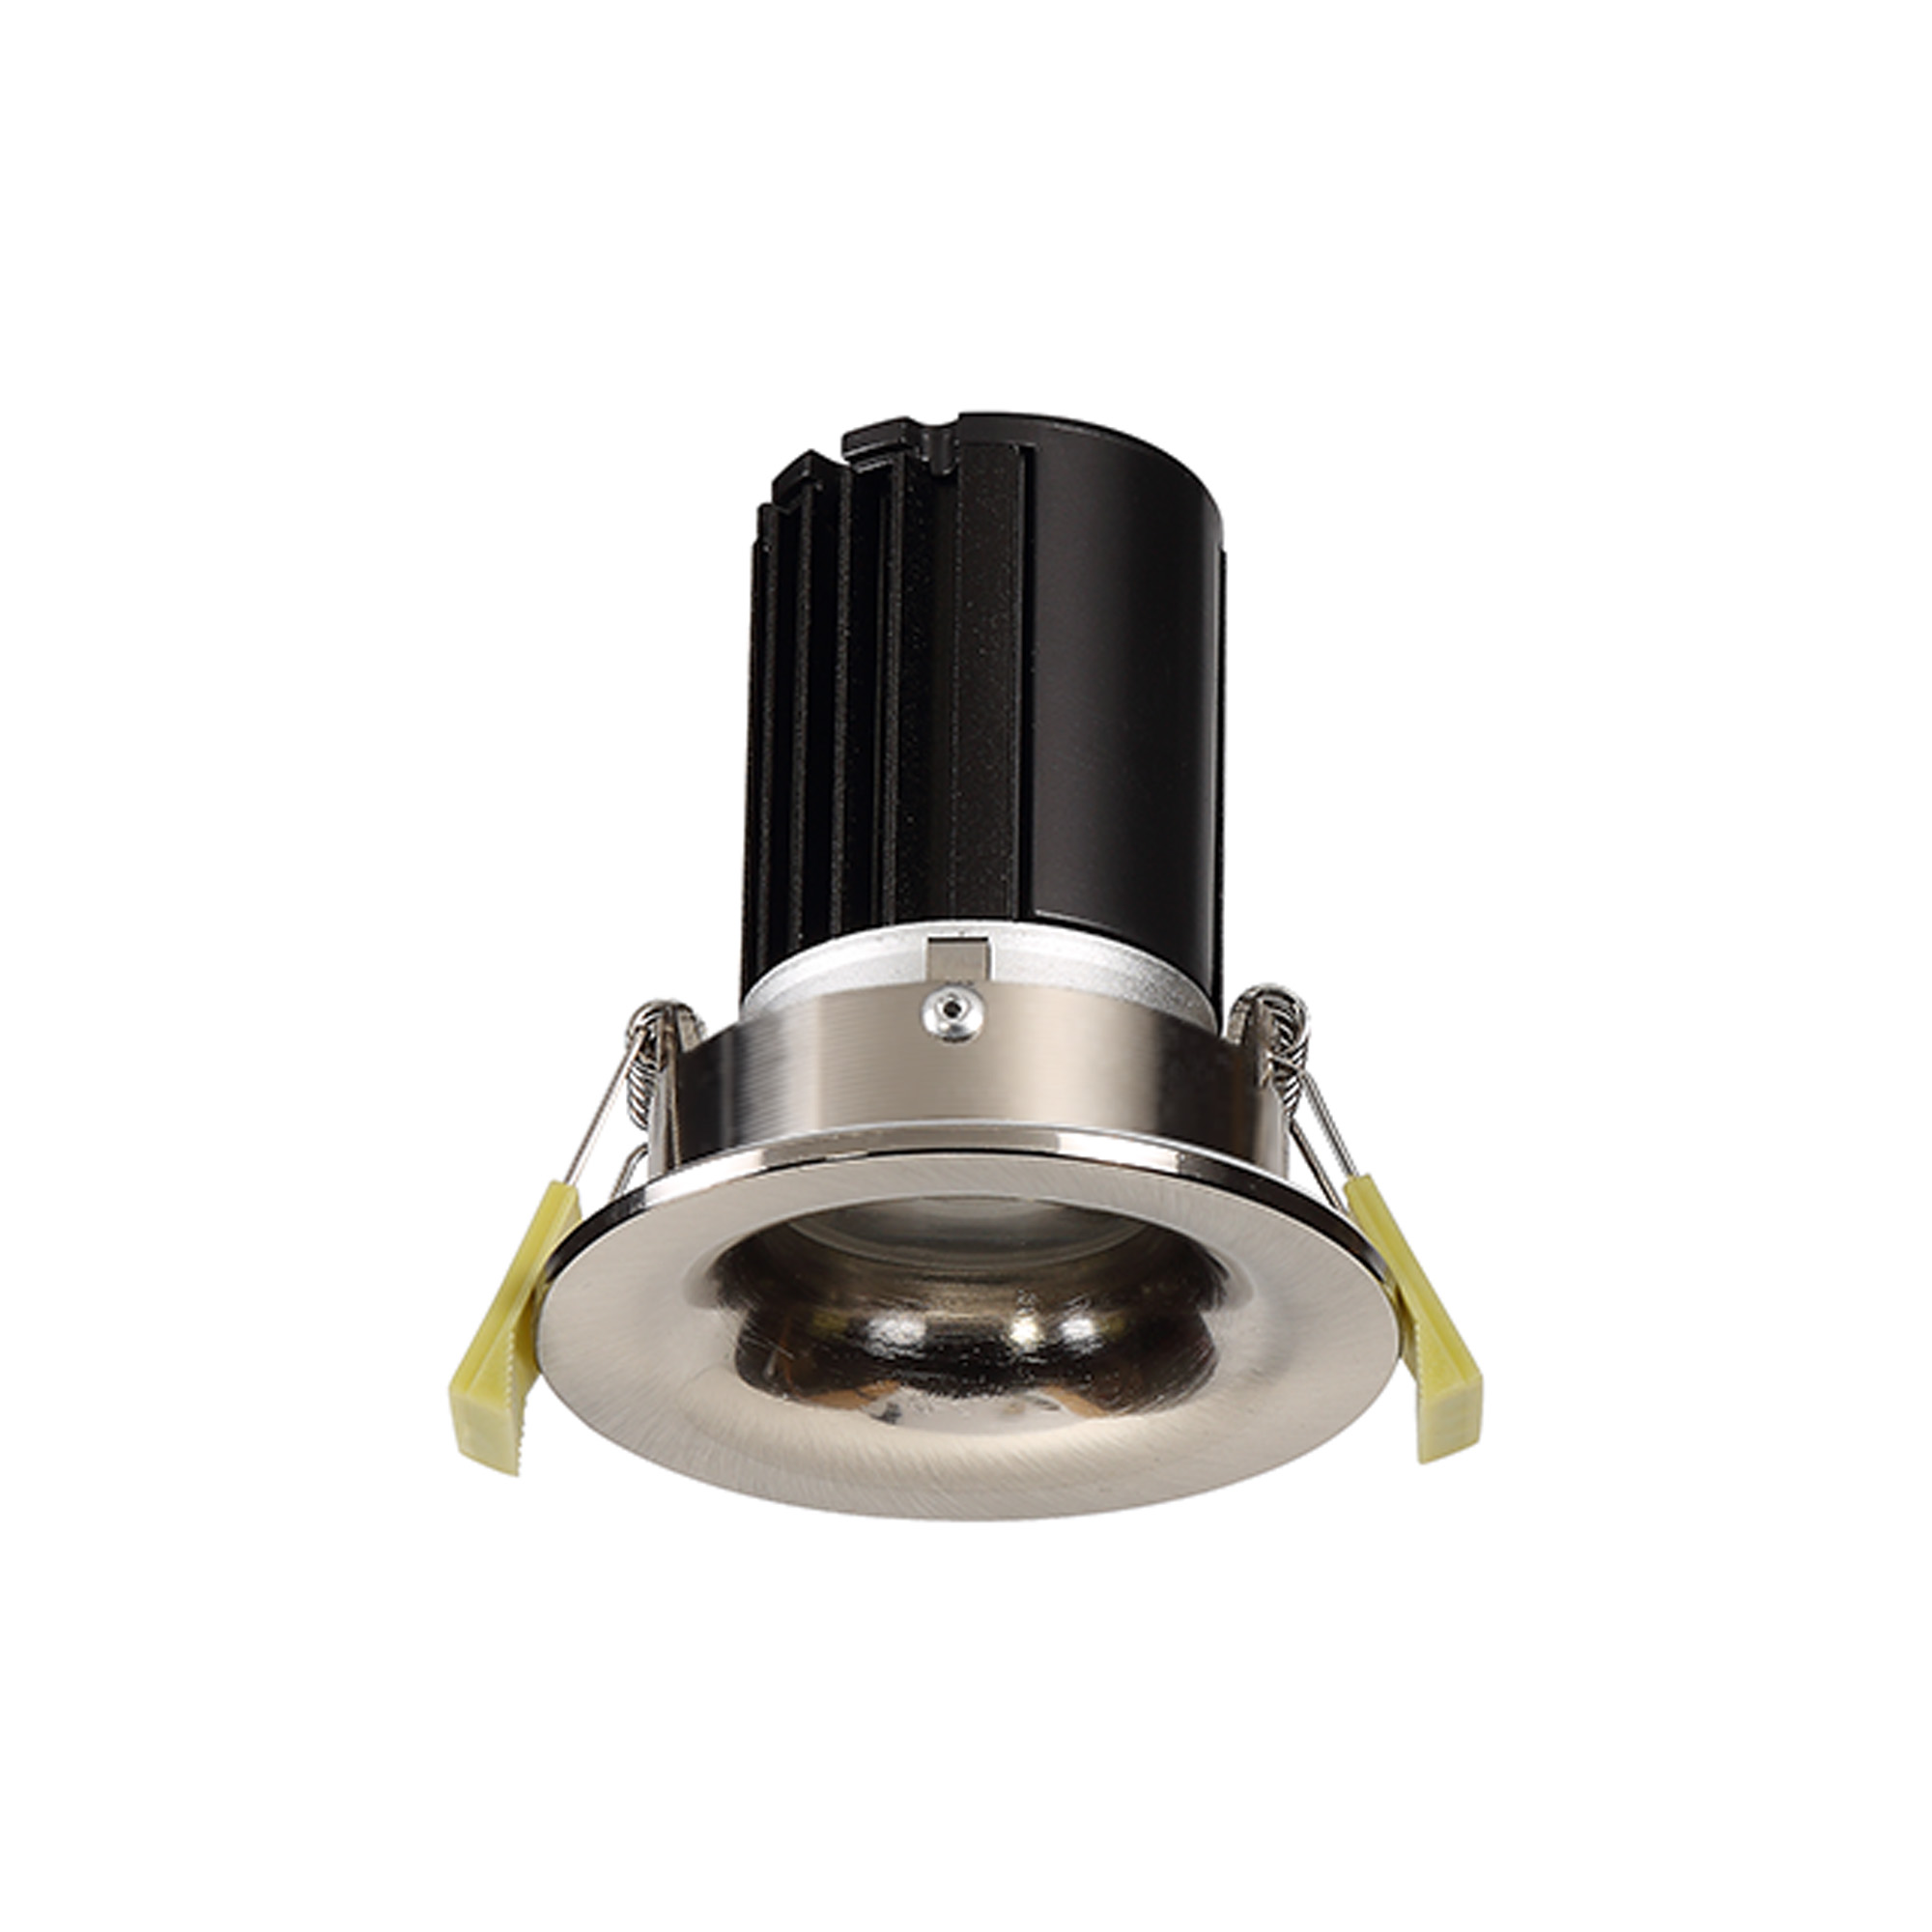 DM201474  Bruve 9 Tridonic powered 9W 2700K 700lm 24° LED Engine;250mA ; CRI>90 LED Engine  Satin Nickel Fixed Round Recessed Downlight; Inner Glass cover; IP65